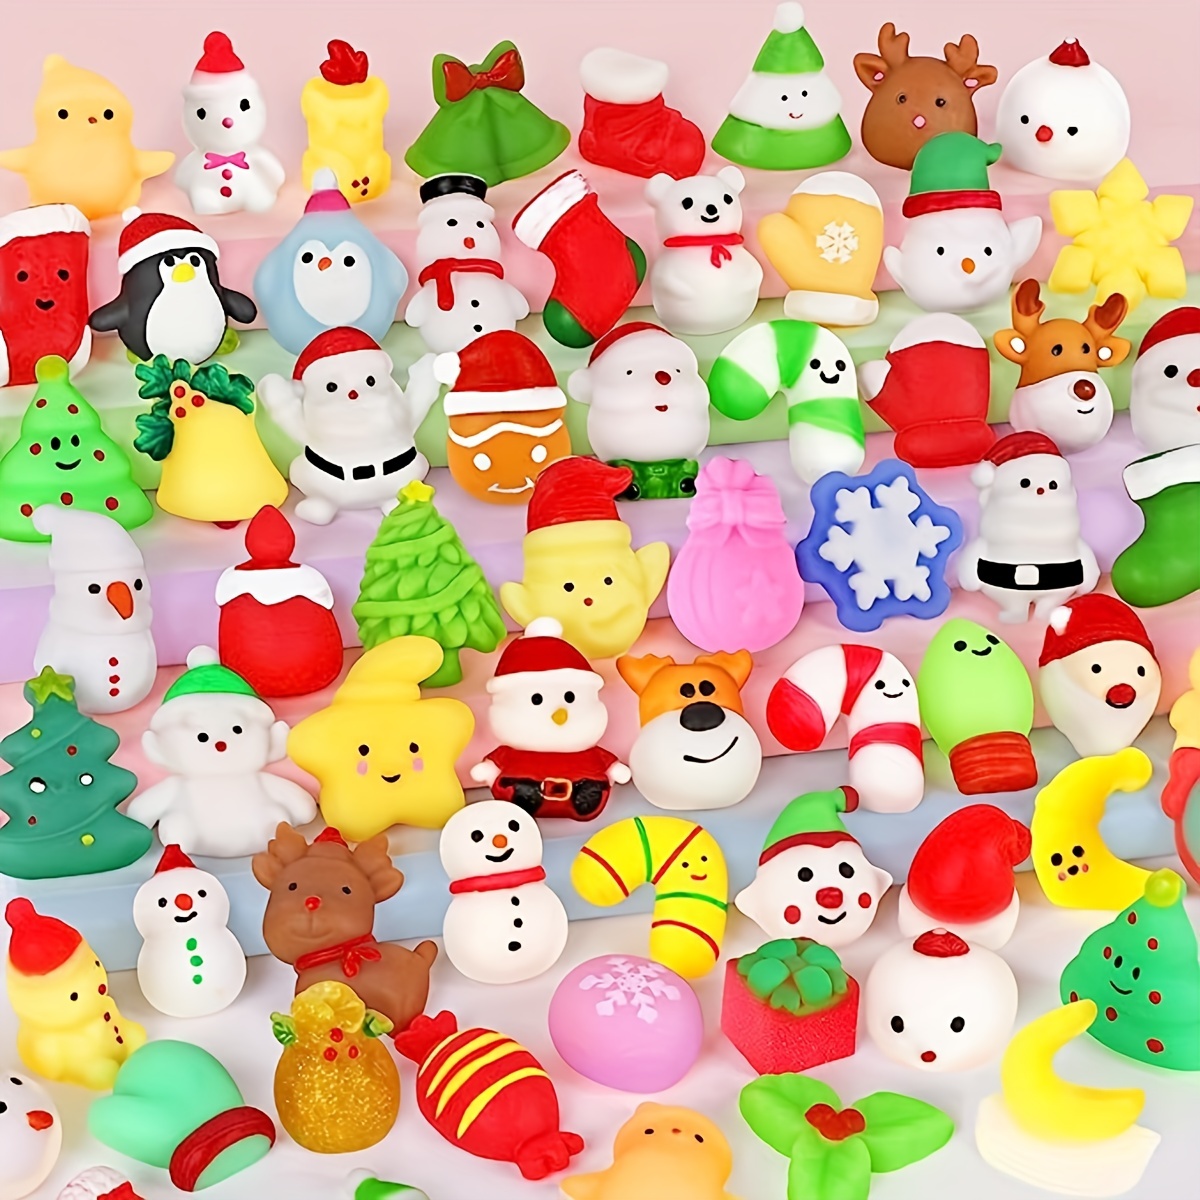 24pcs Squishy Toy Cute Animal Antistress Ball Mochi Toy Stress Relief Toys